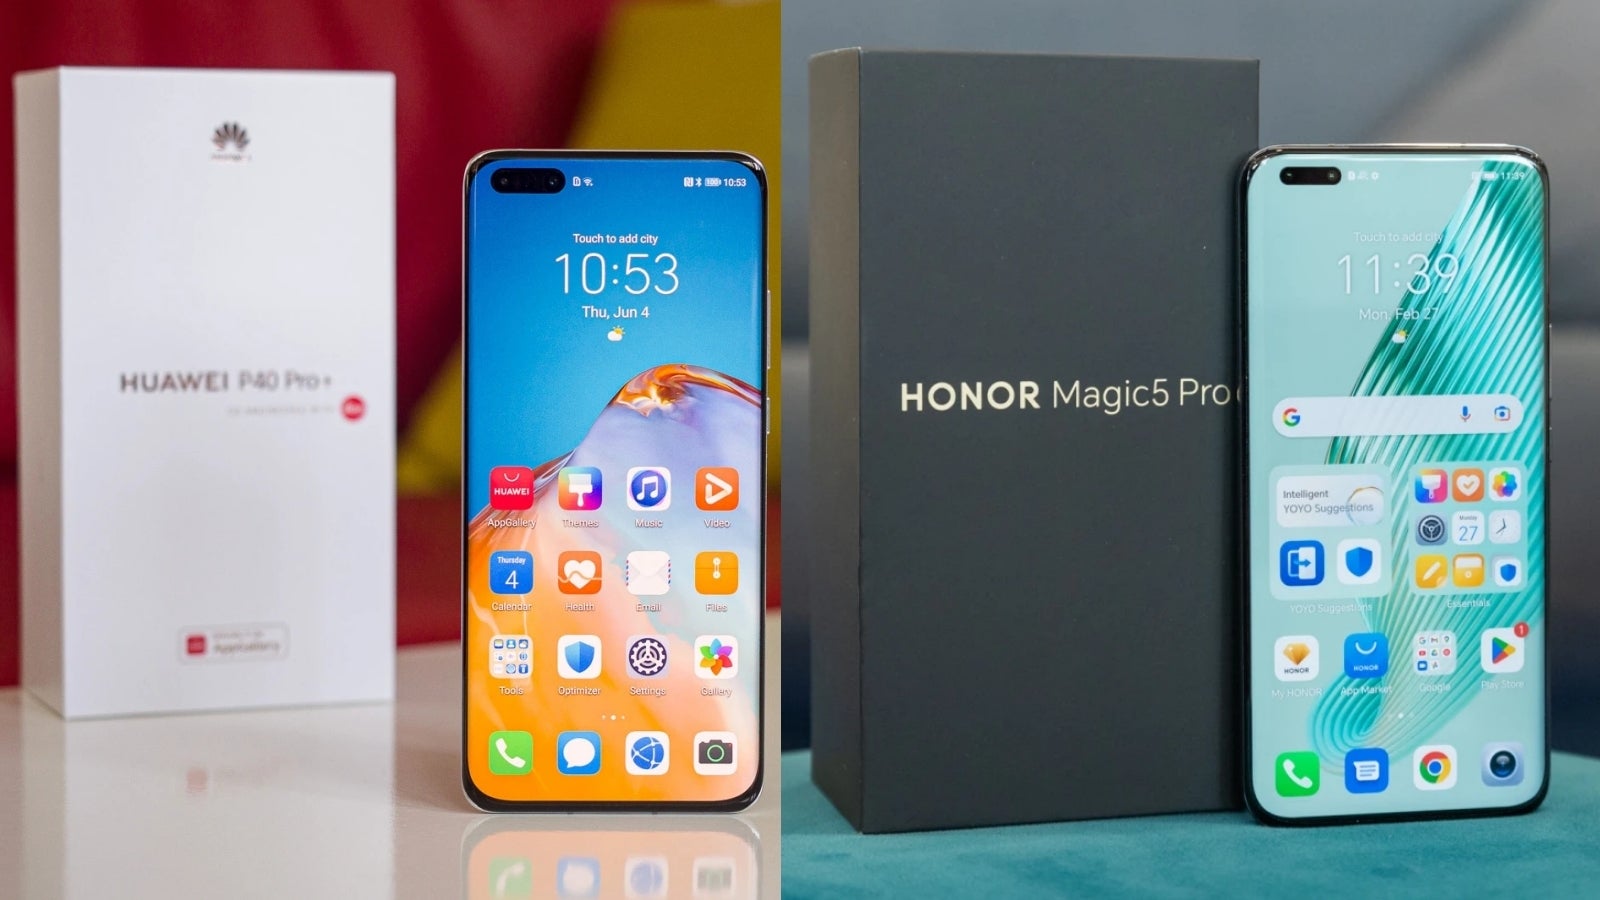 I'm glad Honor brought back the Huawei P40 Pro's design language with the Magic 5 Pro! The noticeably smaller Dynamic Island-like cutout (pioneered by Huawei) looks far less obtrusive than Apple's, right? - Huawei legacy reborn with full Google support! Stunning Honor Magic 5 Pro - Samsung’s new nemesis?